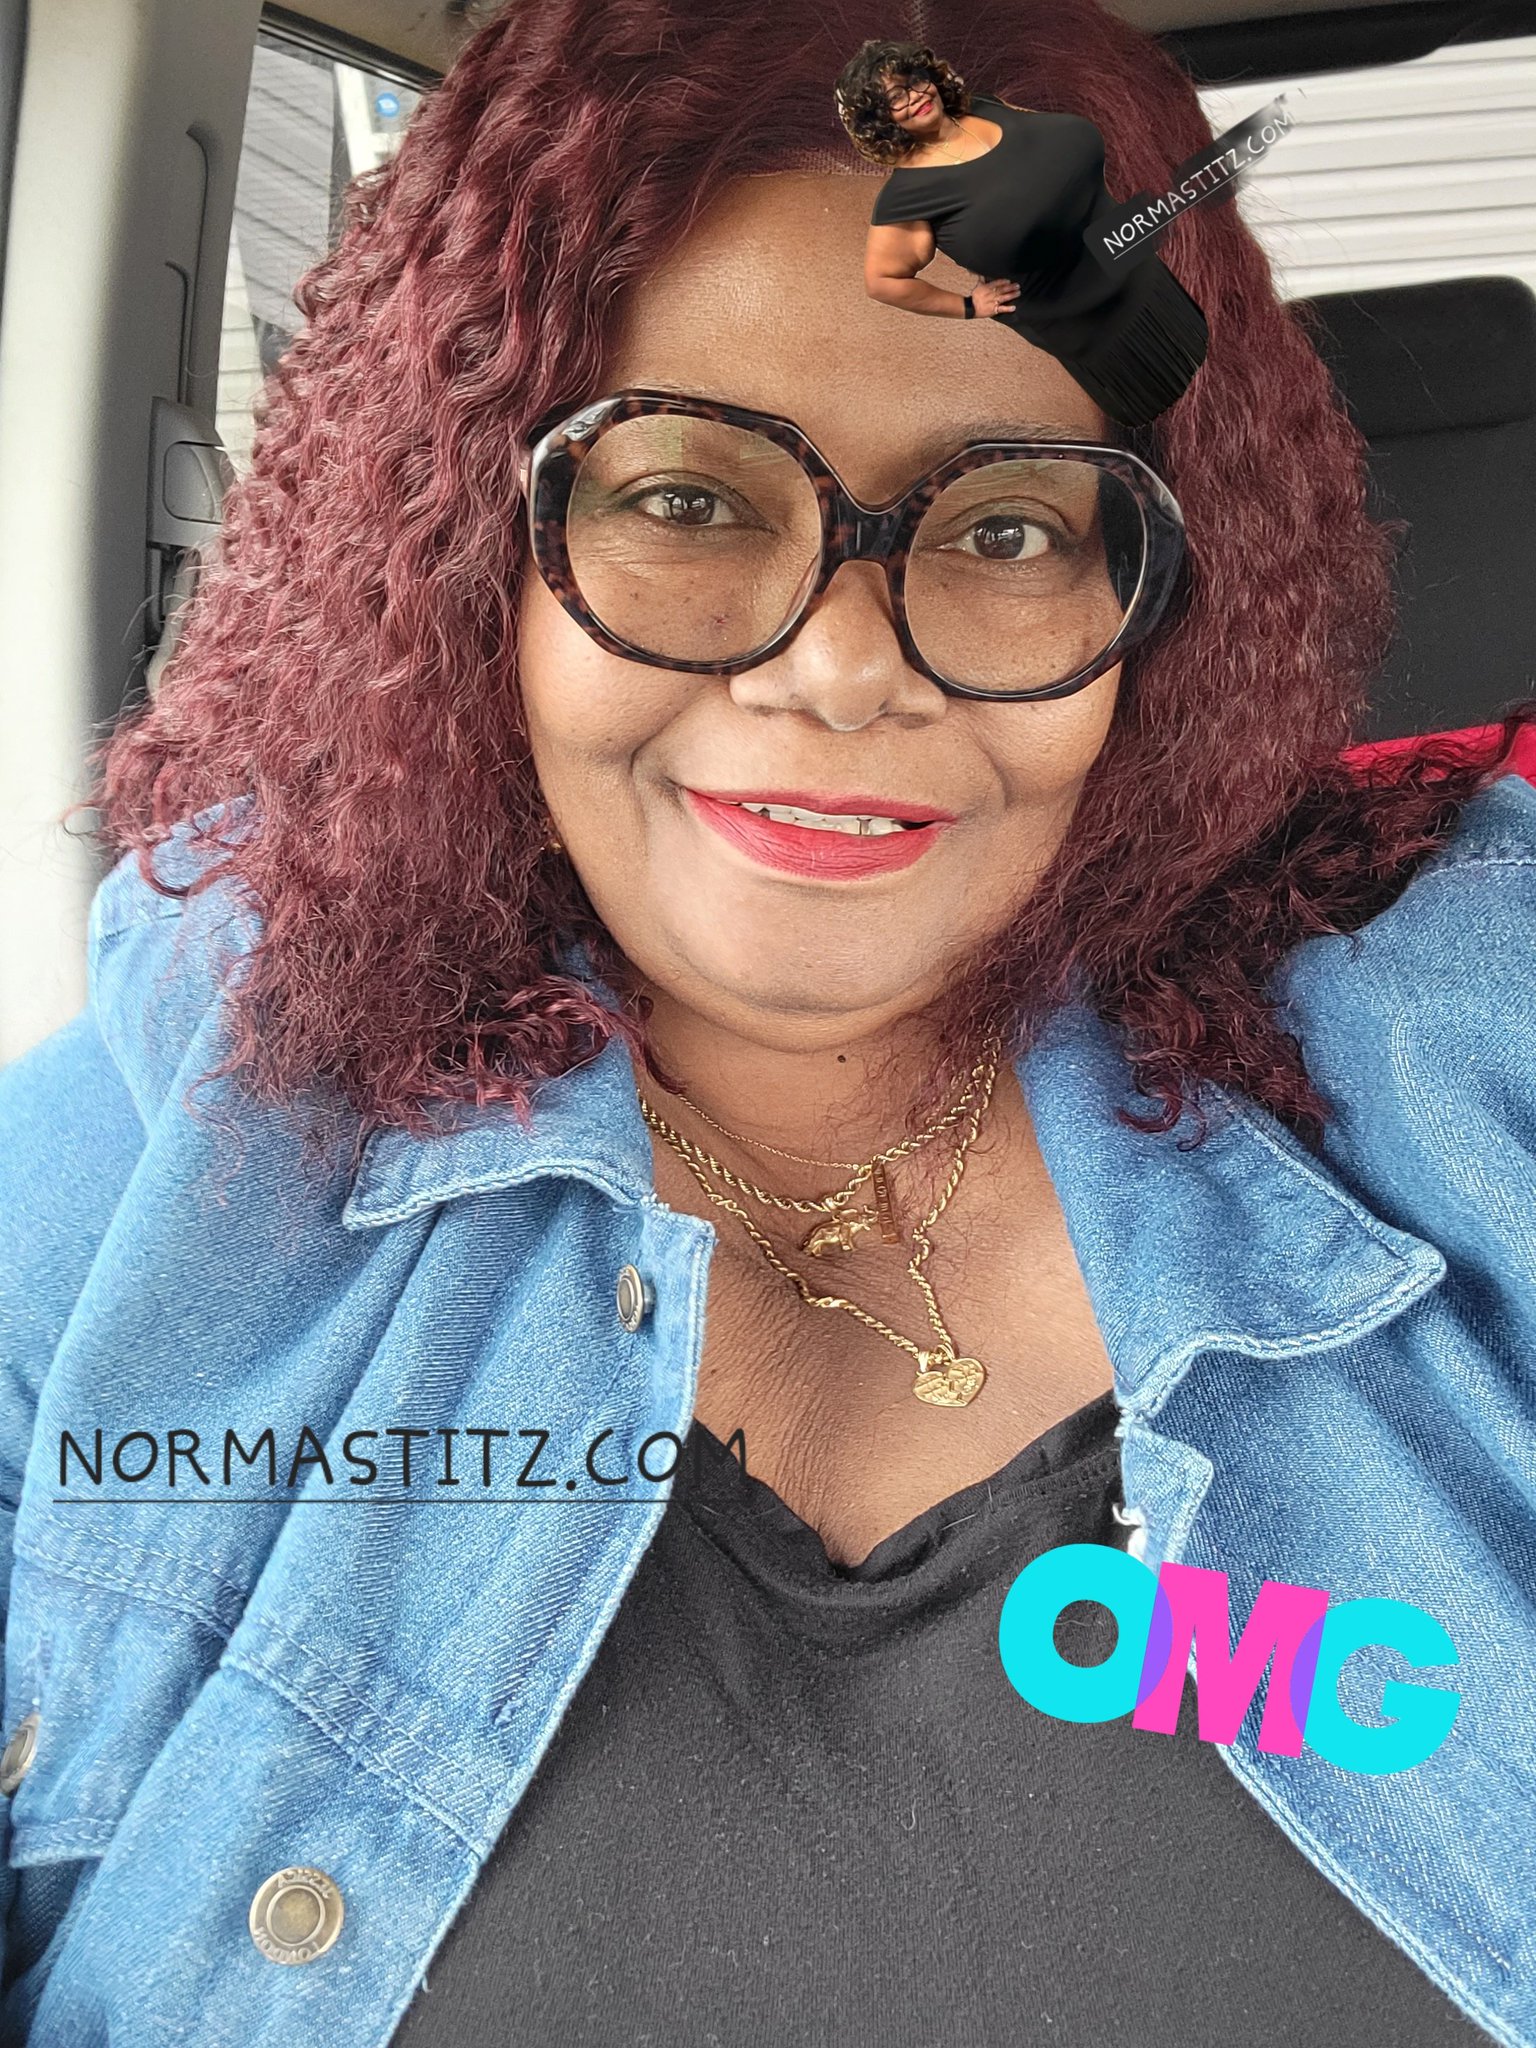 Tw Pornstars 2 Pic Mz Norma Stitz Twitter Off To The Market Good Morning To You All Lots 